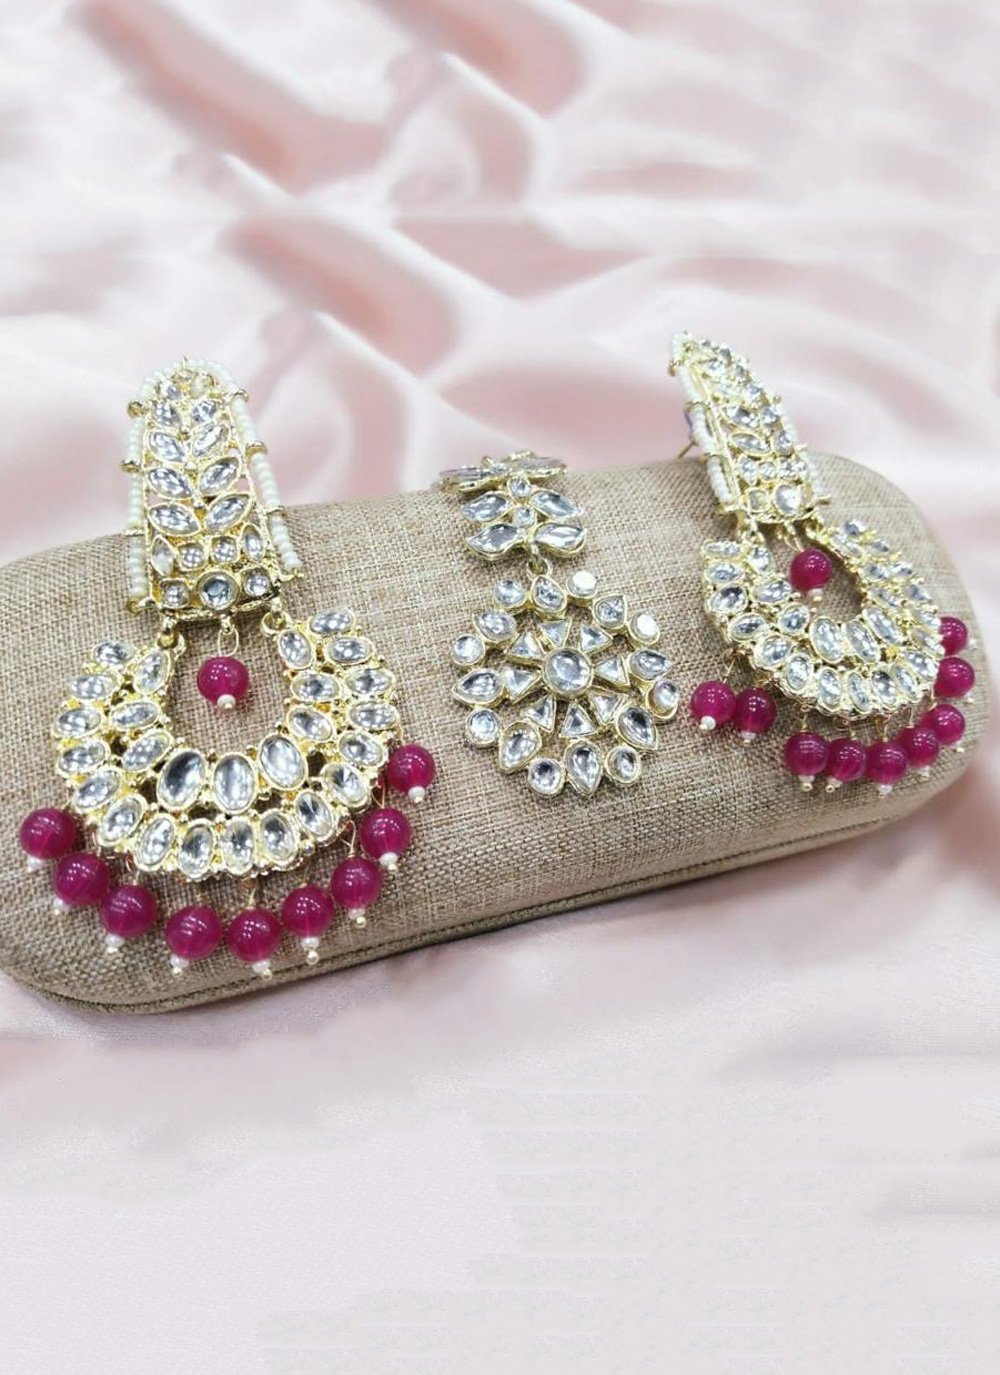 Catchy Gold Rodium Polish Beads Work Alloy Fuchsia and White Earrings Set For Party